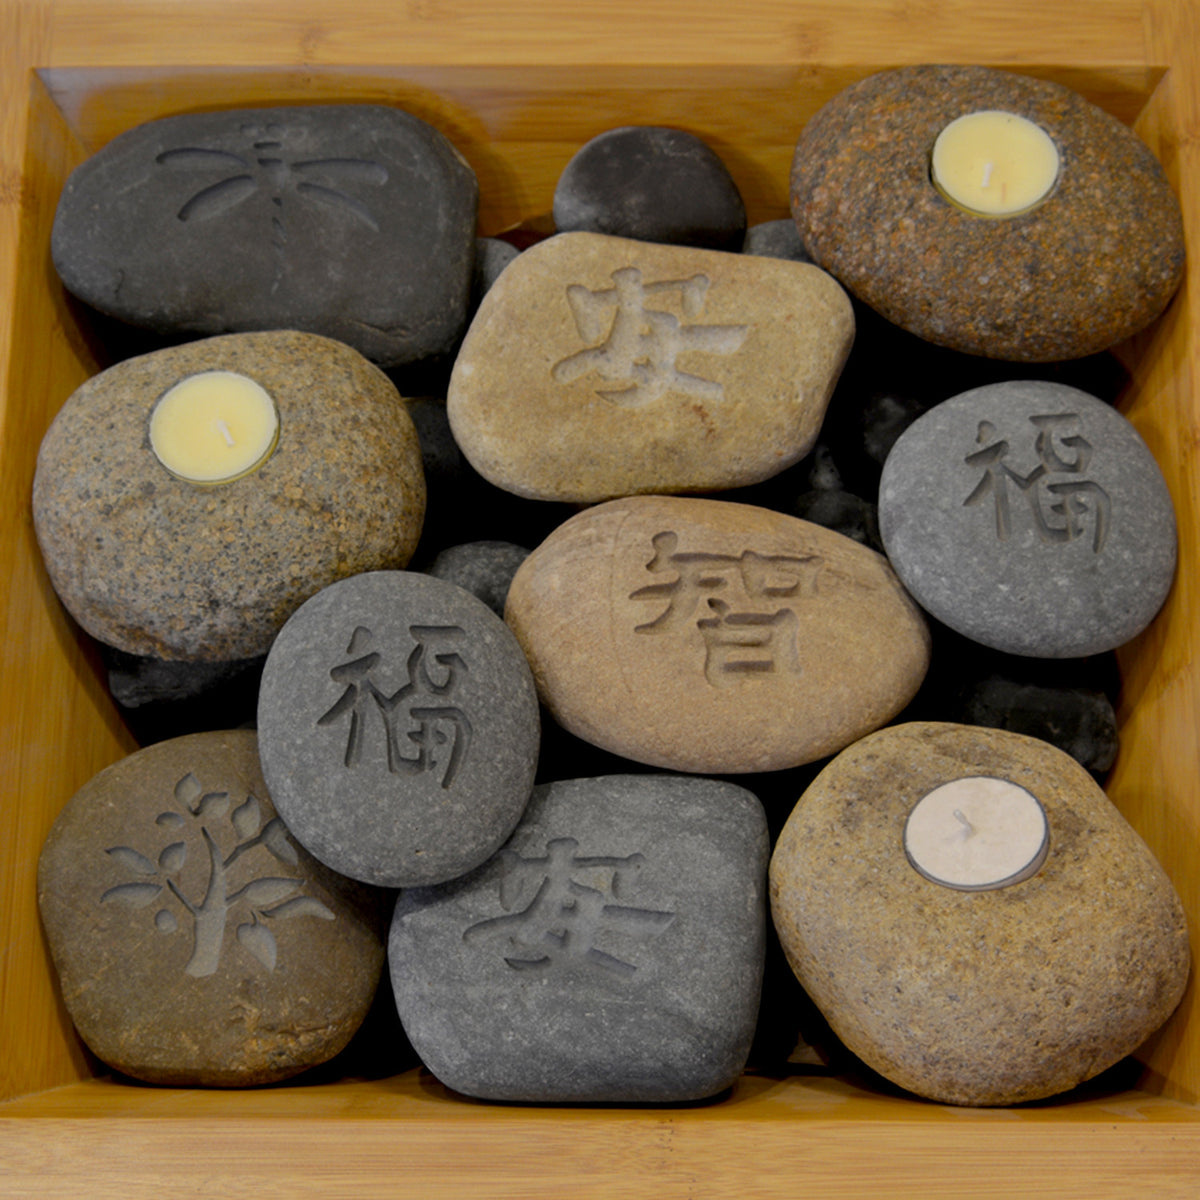 Stone Forest Character Pebbles are  each uniquely carved from natural river pebbles image 8 of 8